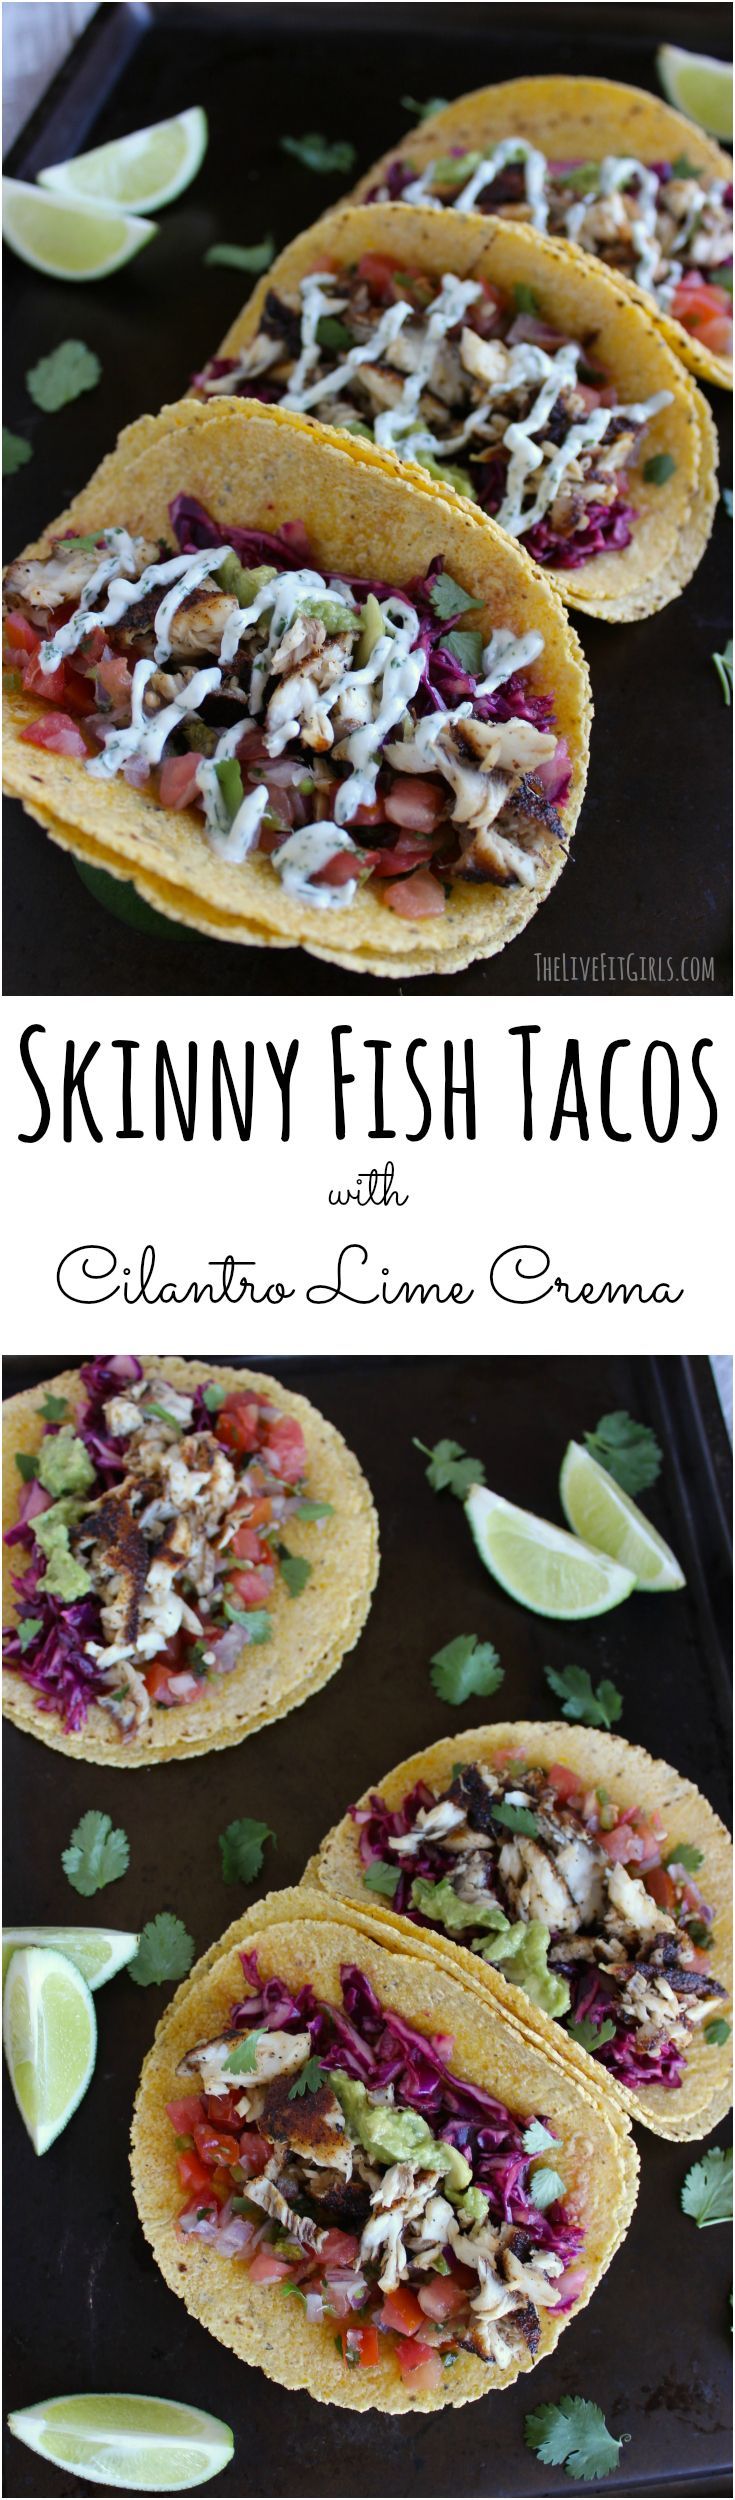 Gear up for a SKINNY Cinco de Mayo with these Skinny Fish Tacos topped with a healthy Cilantro Lime Crema sauce!